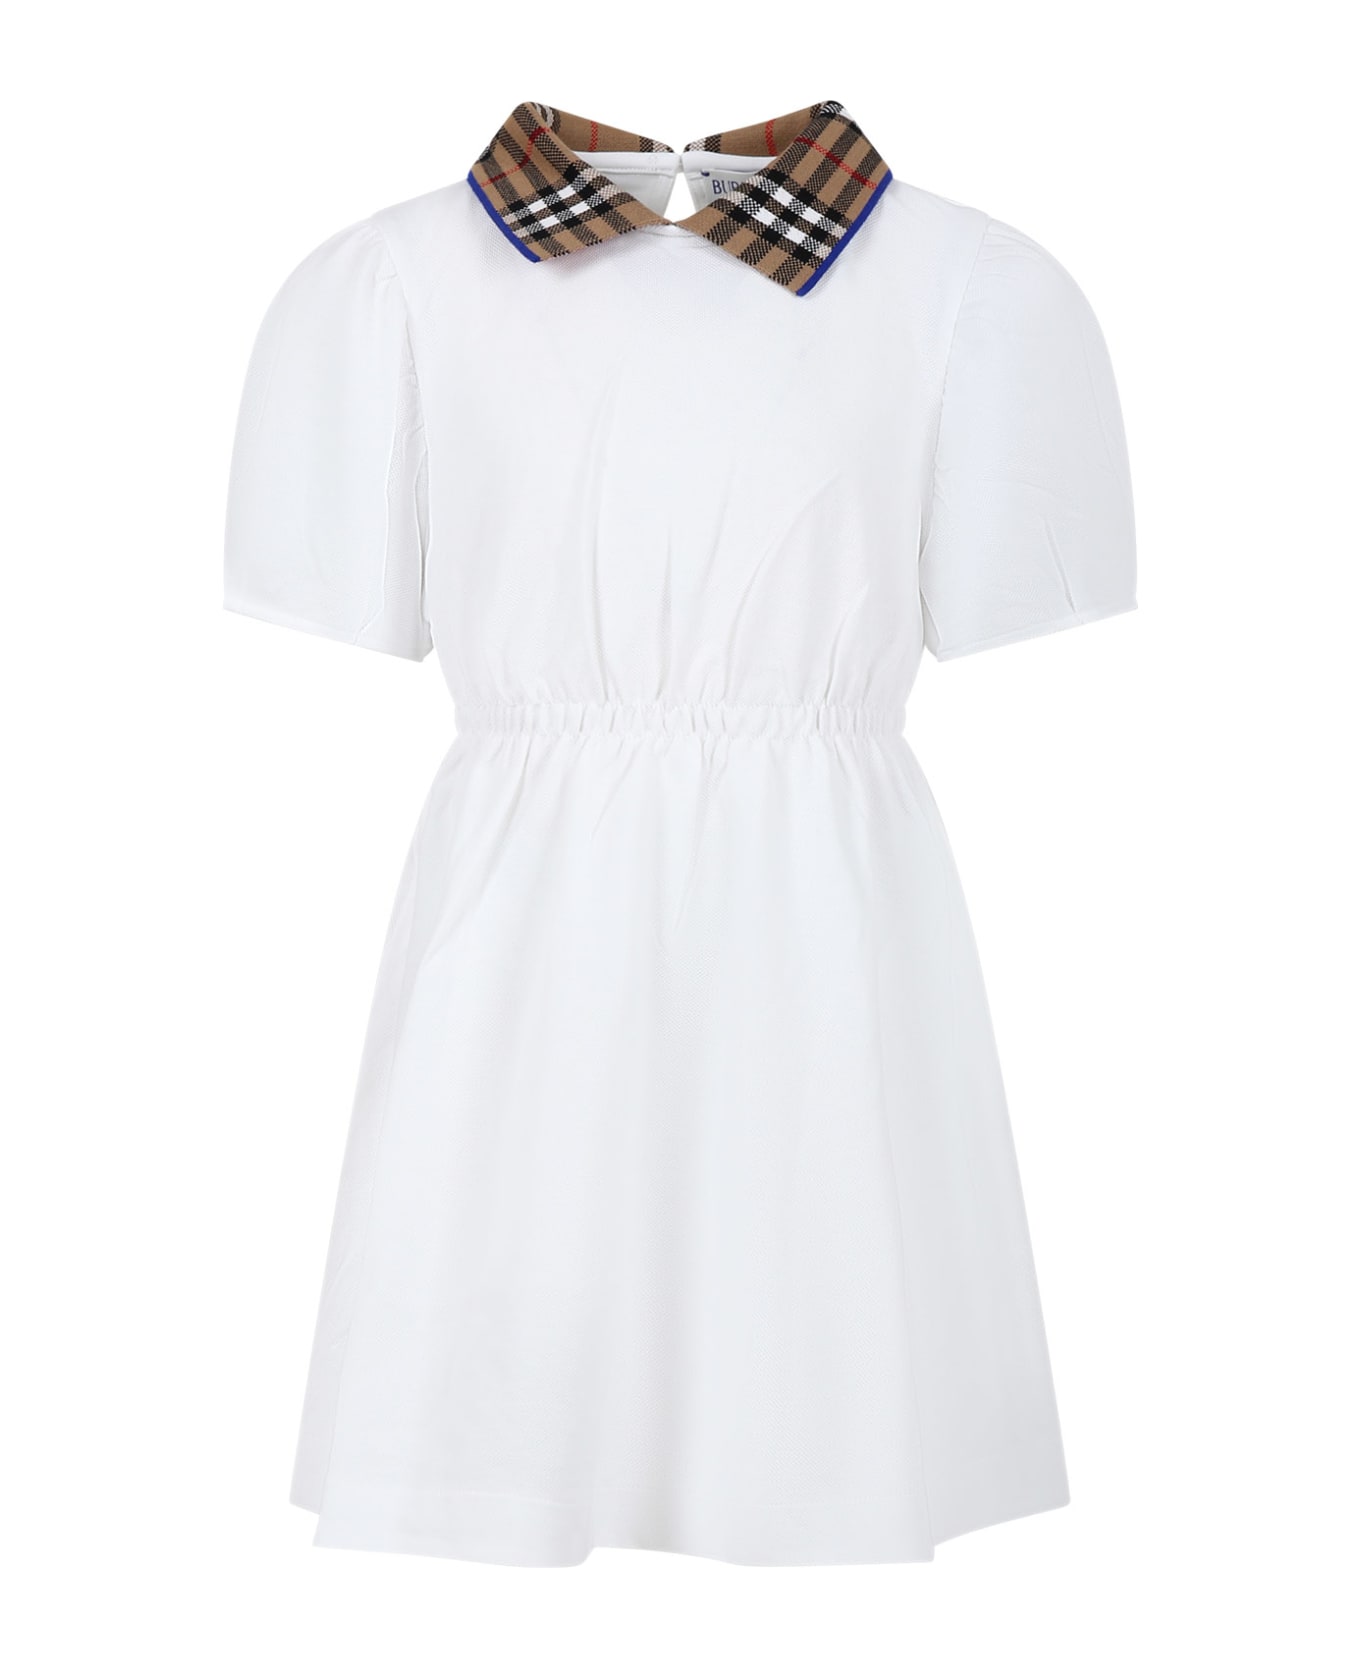 Burberry White Dress For Girl With Vintage Check On The Collar - White